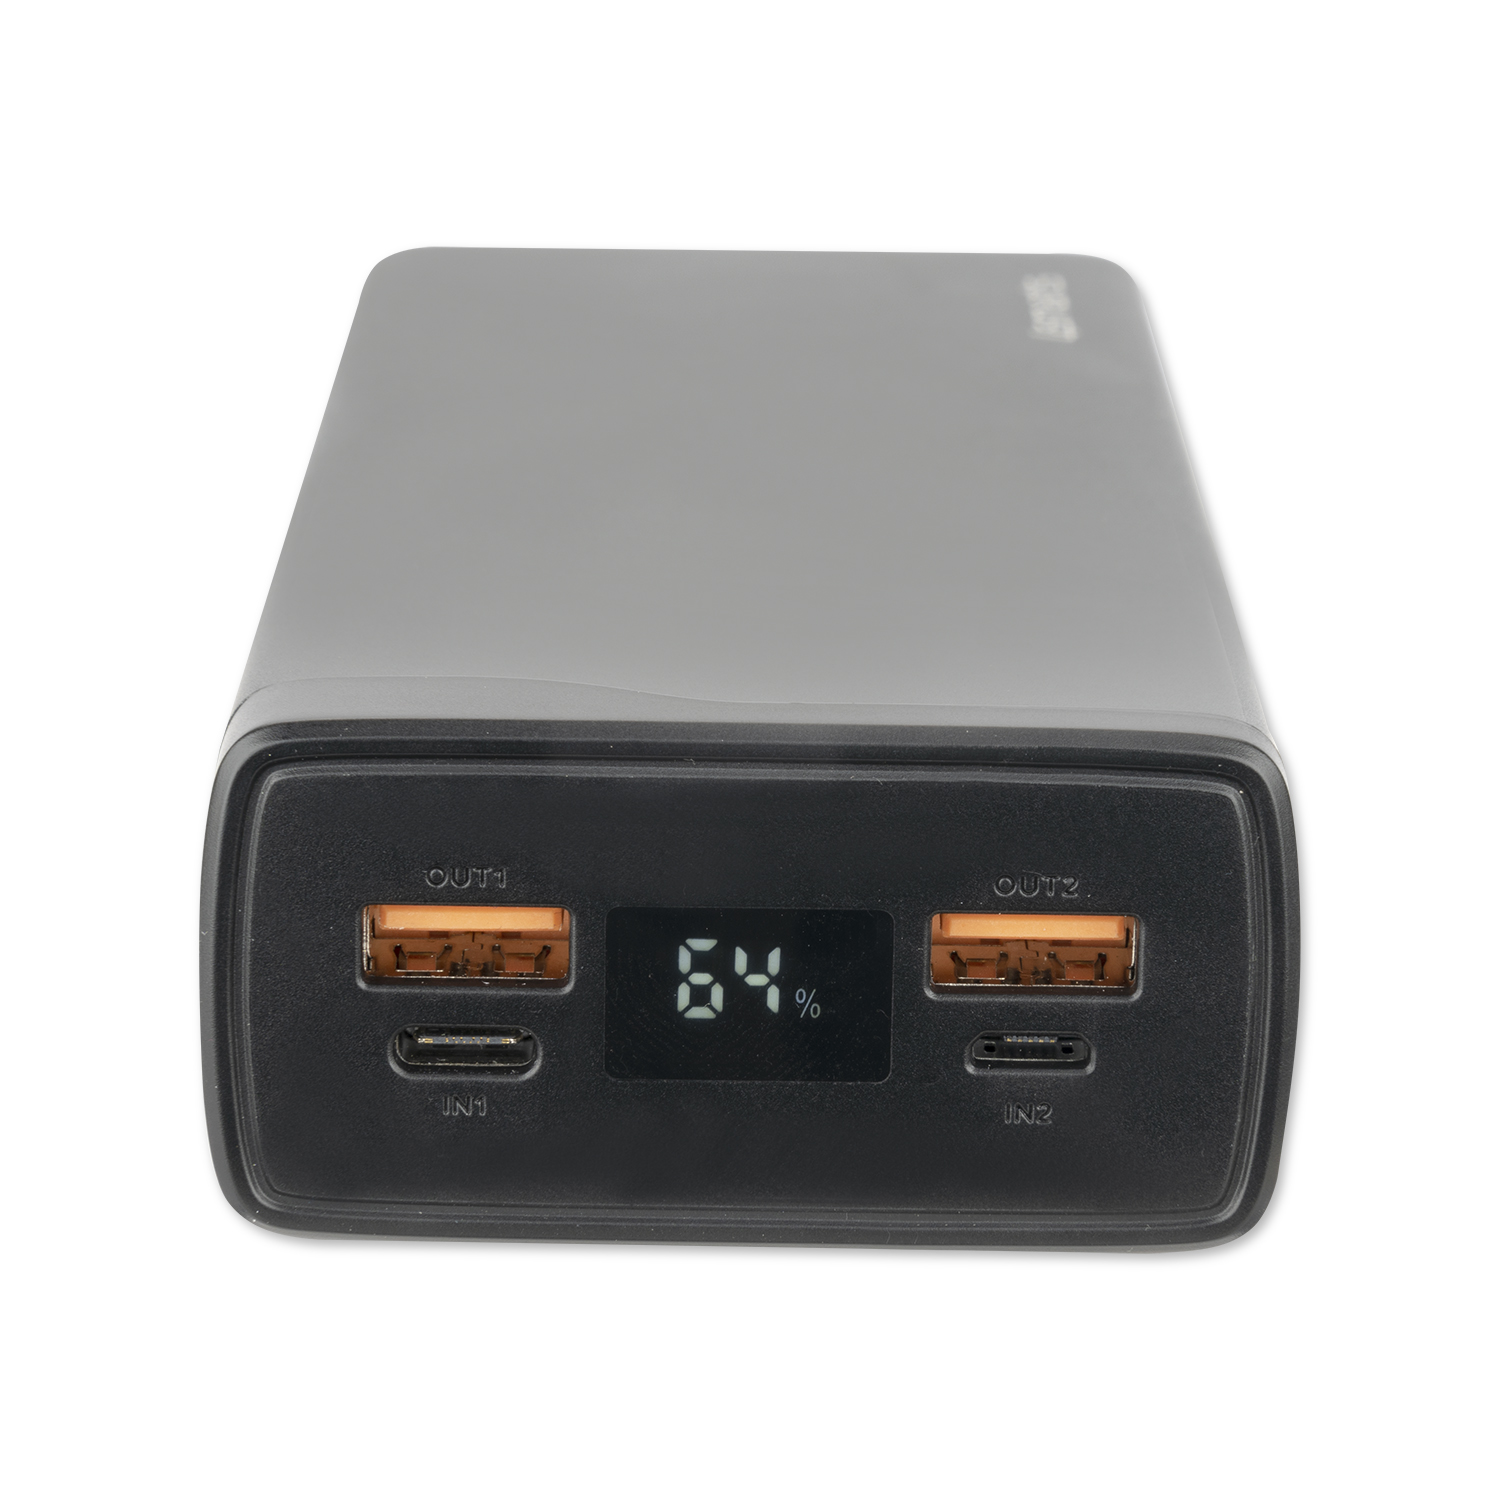 The 4smarts VoltHub Pro 26800mAh 22.5W powerbank shows you the exact battery level in real time on the LCD display.